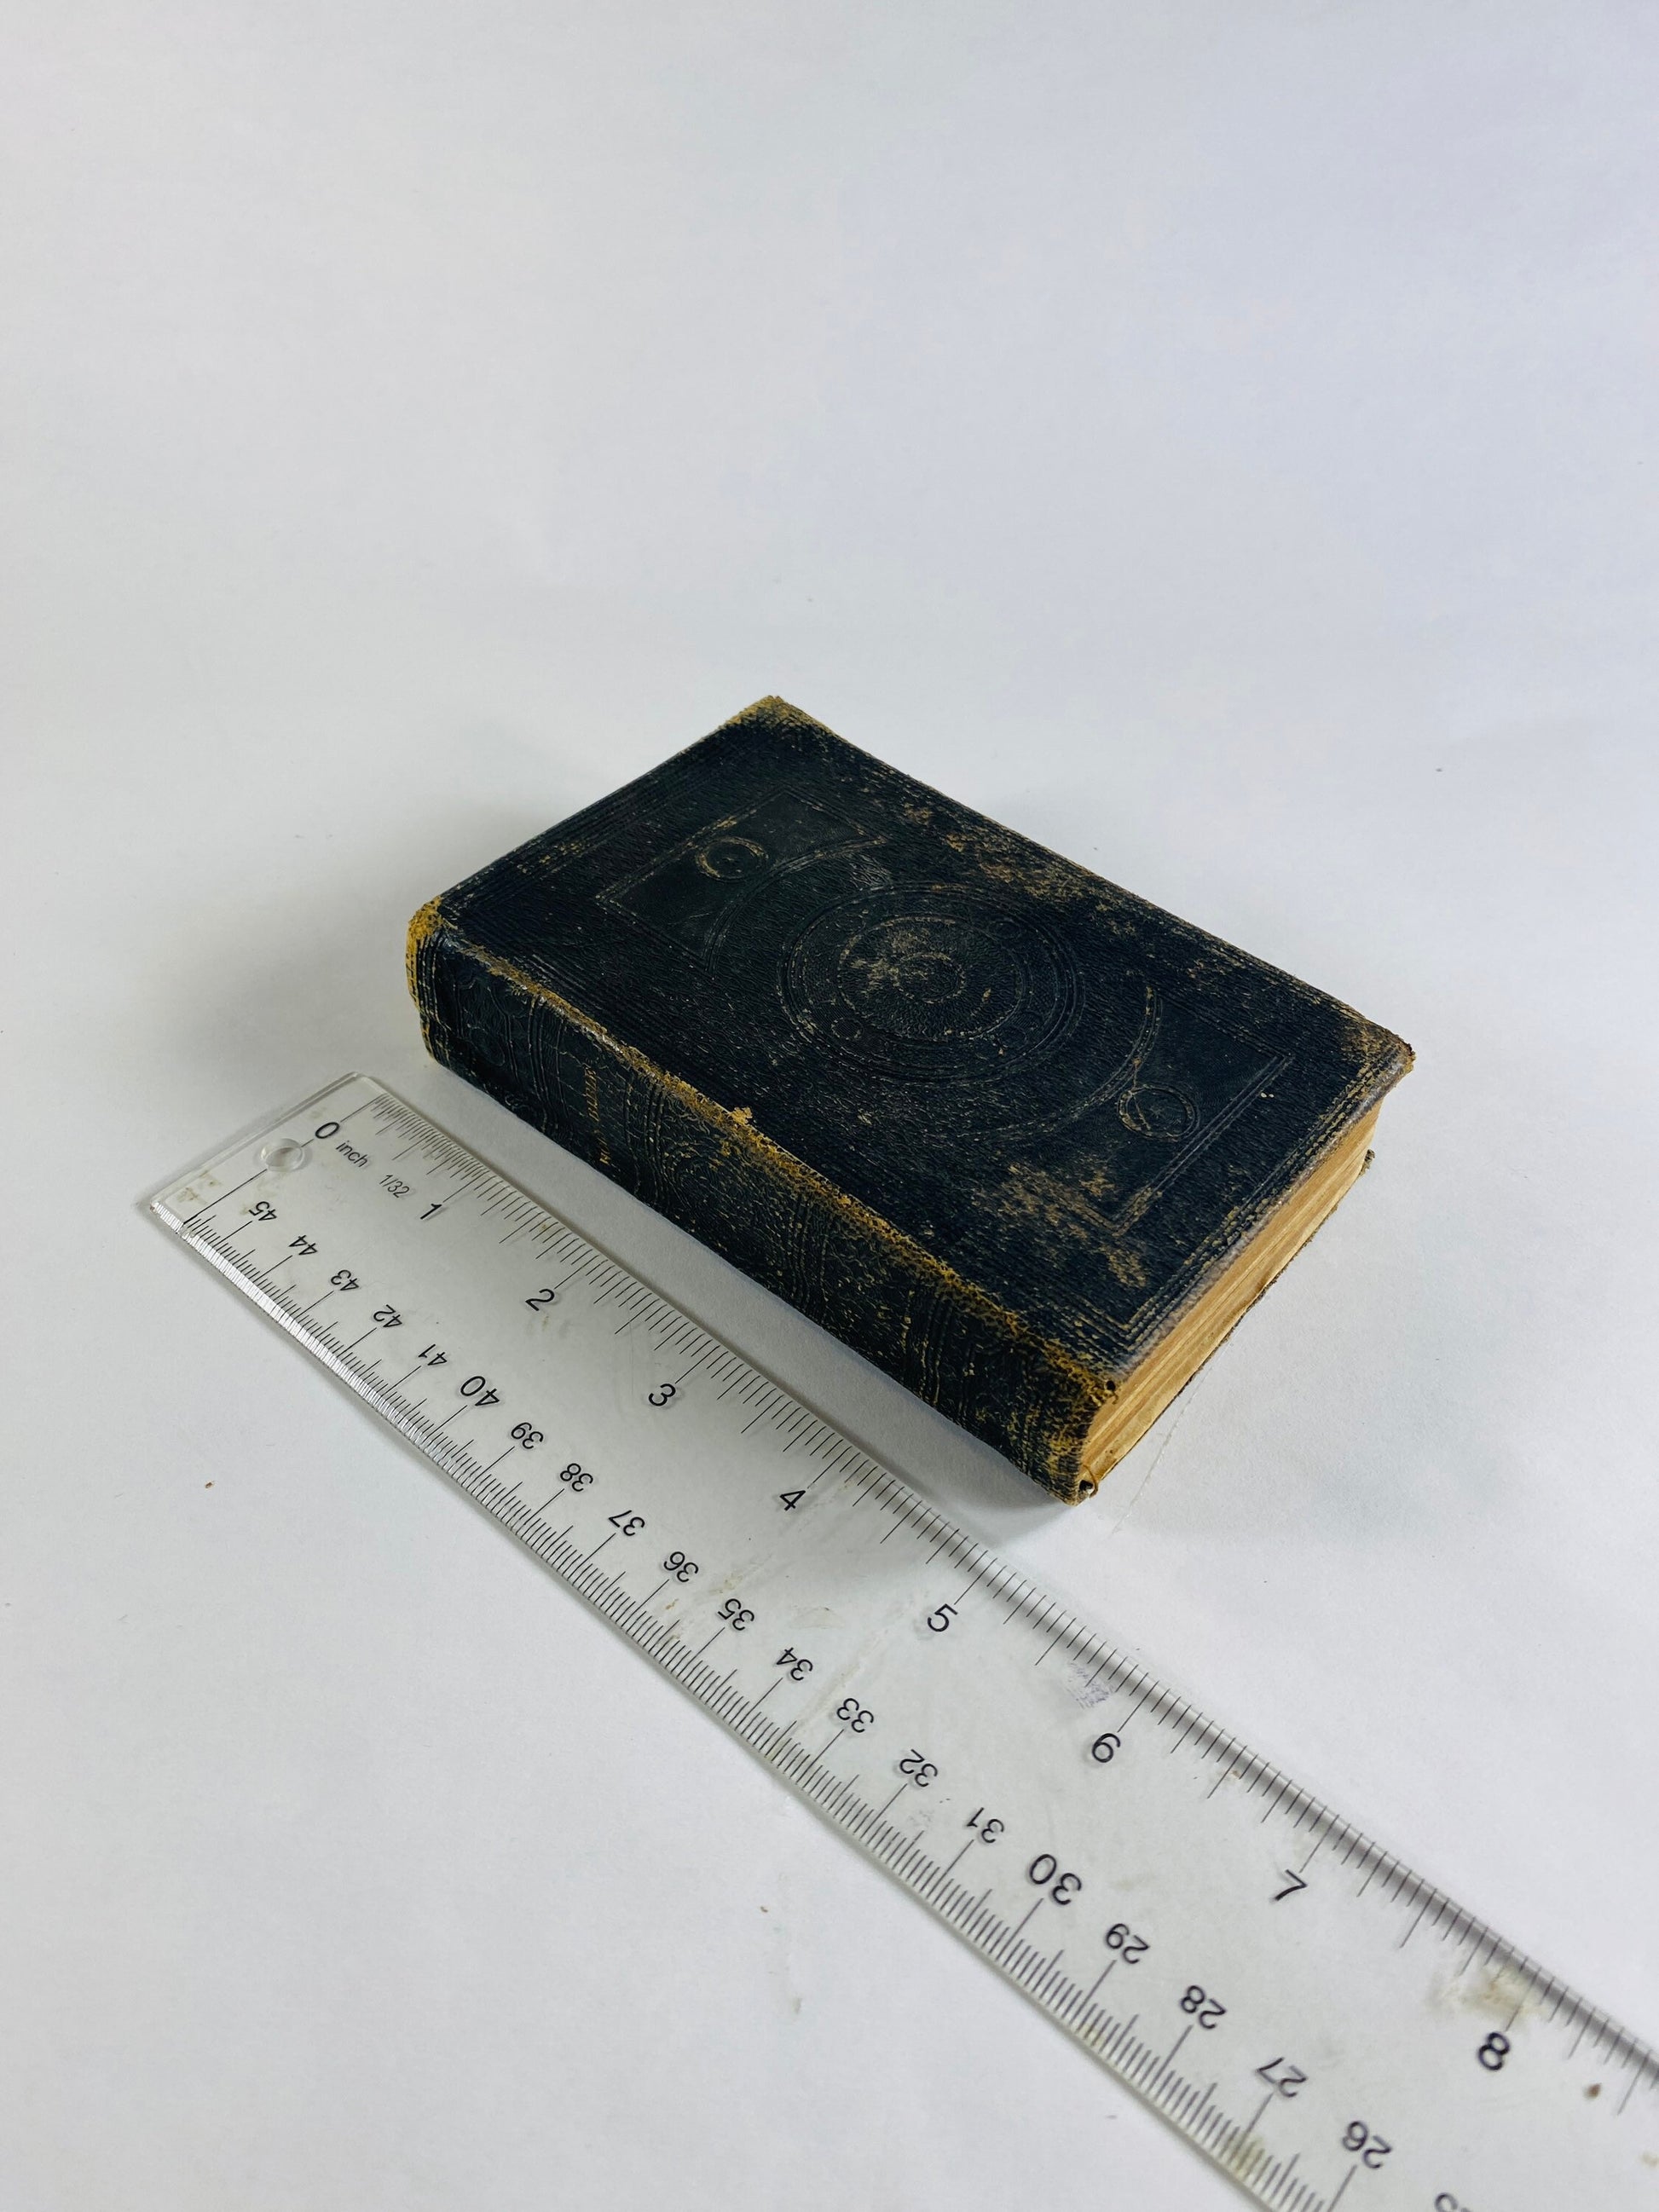 1850 Holy Bible Oxford with worn leather cover London incomplete printing Old New Testament Jesus Christ. Small miniature book decor